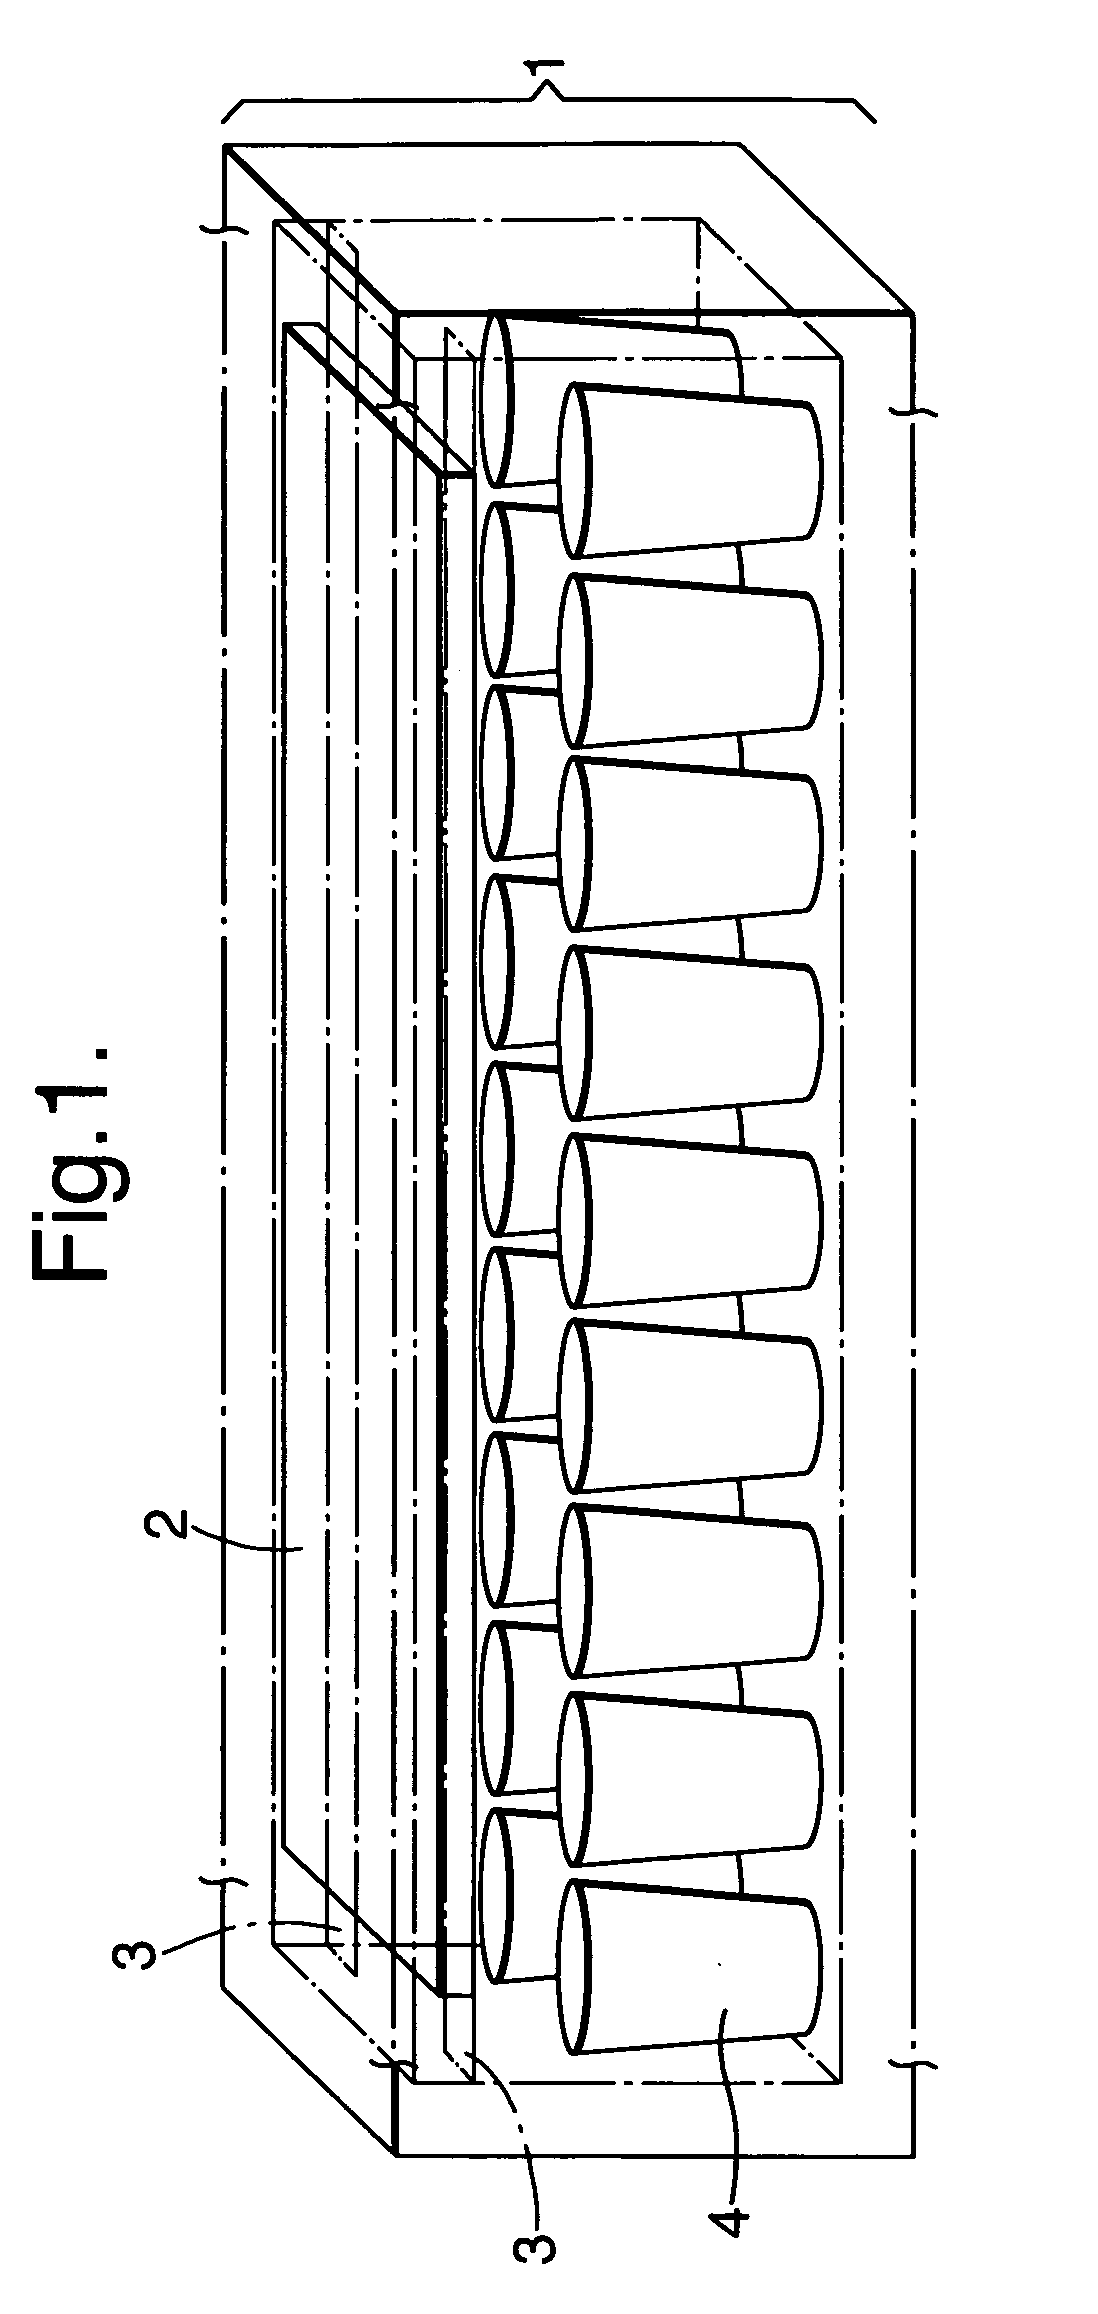 Apparatus and method for displaying and dispensing frozen edible products